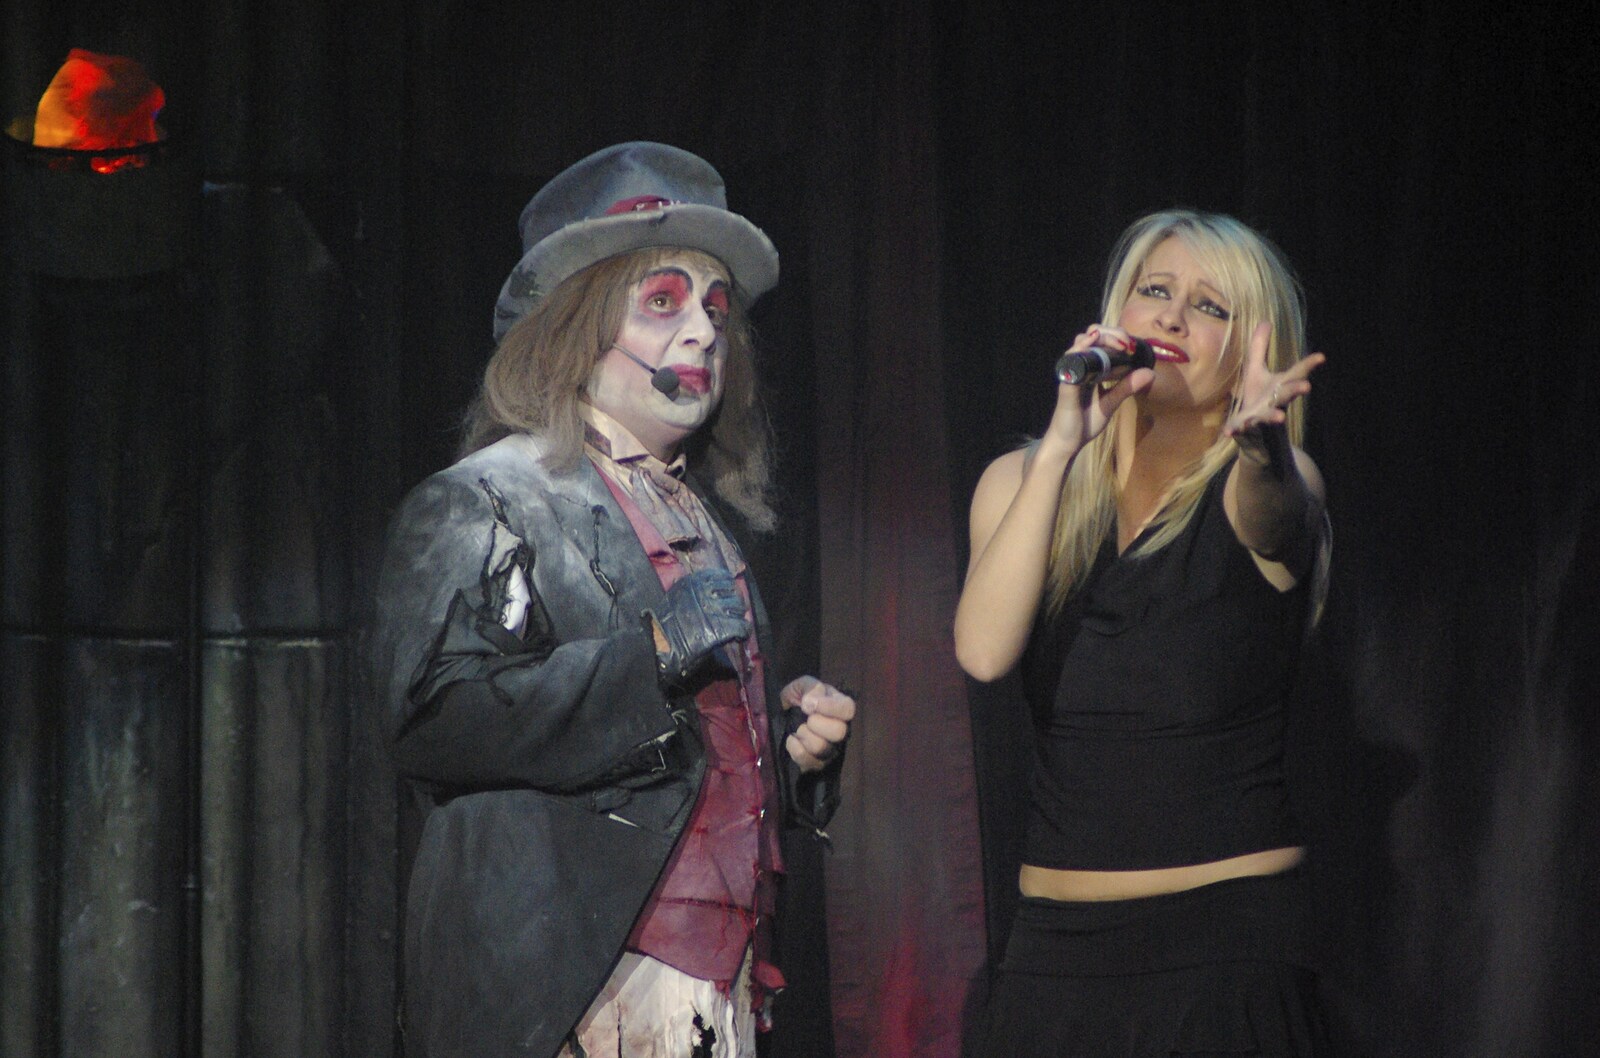 Stringfellow and the lead protagonist, Pandora from Hell Mary and Vampires Rock, Broadway Theatre, Peterborough - 26th October 2007